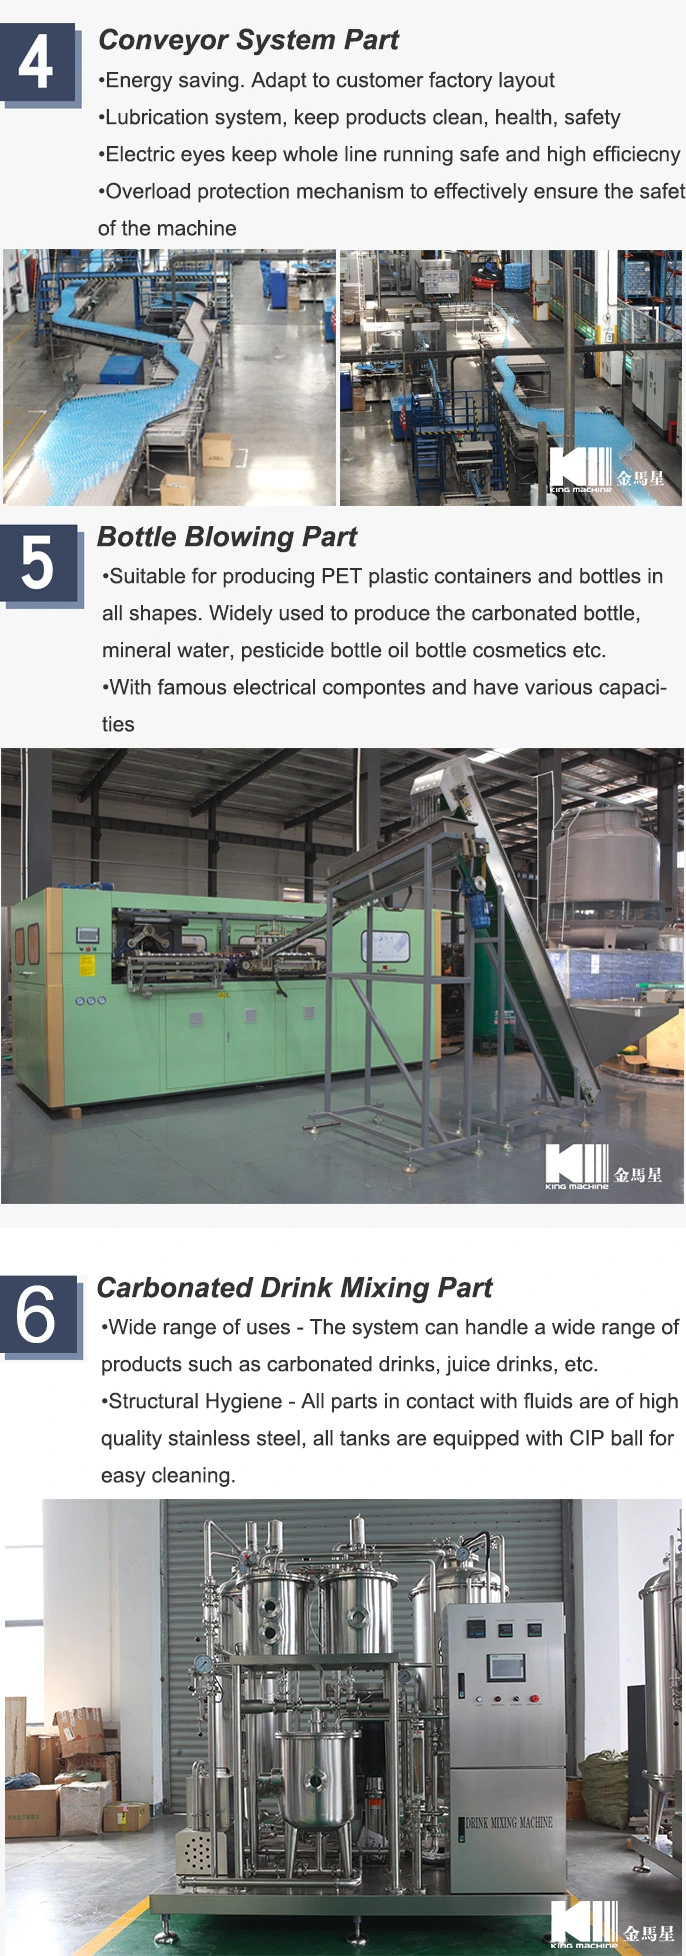 Automatic Carbonated Drink Filling Machine / CSD Filling Machine / Soft Drink Plant